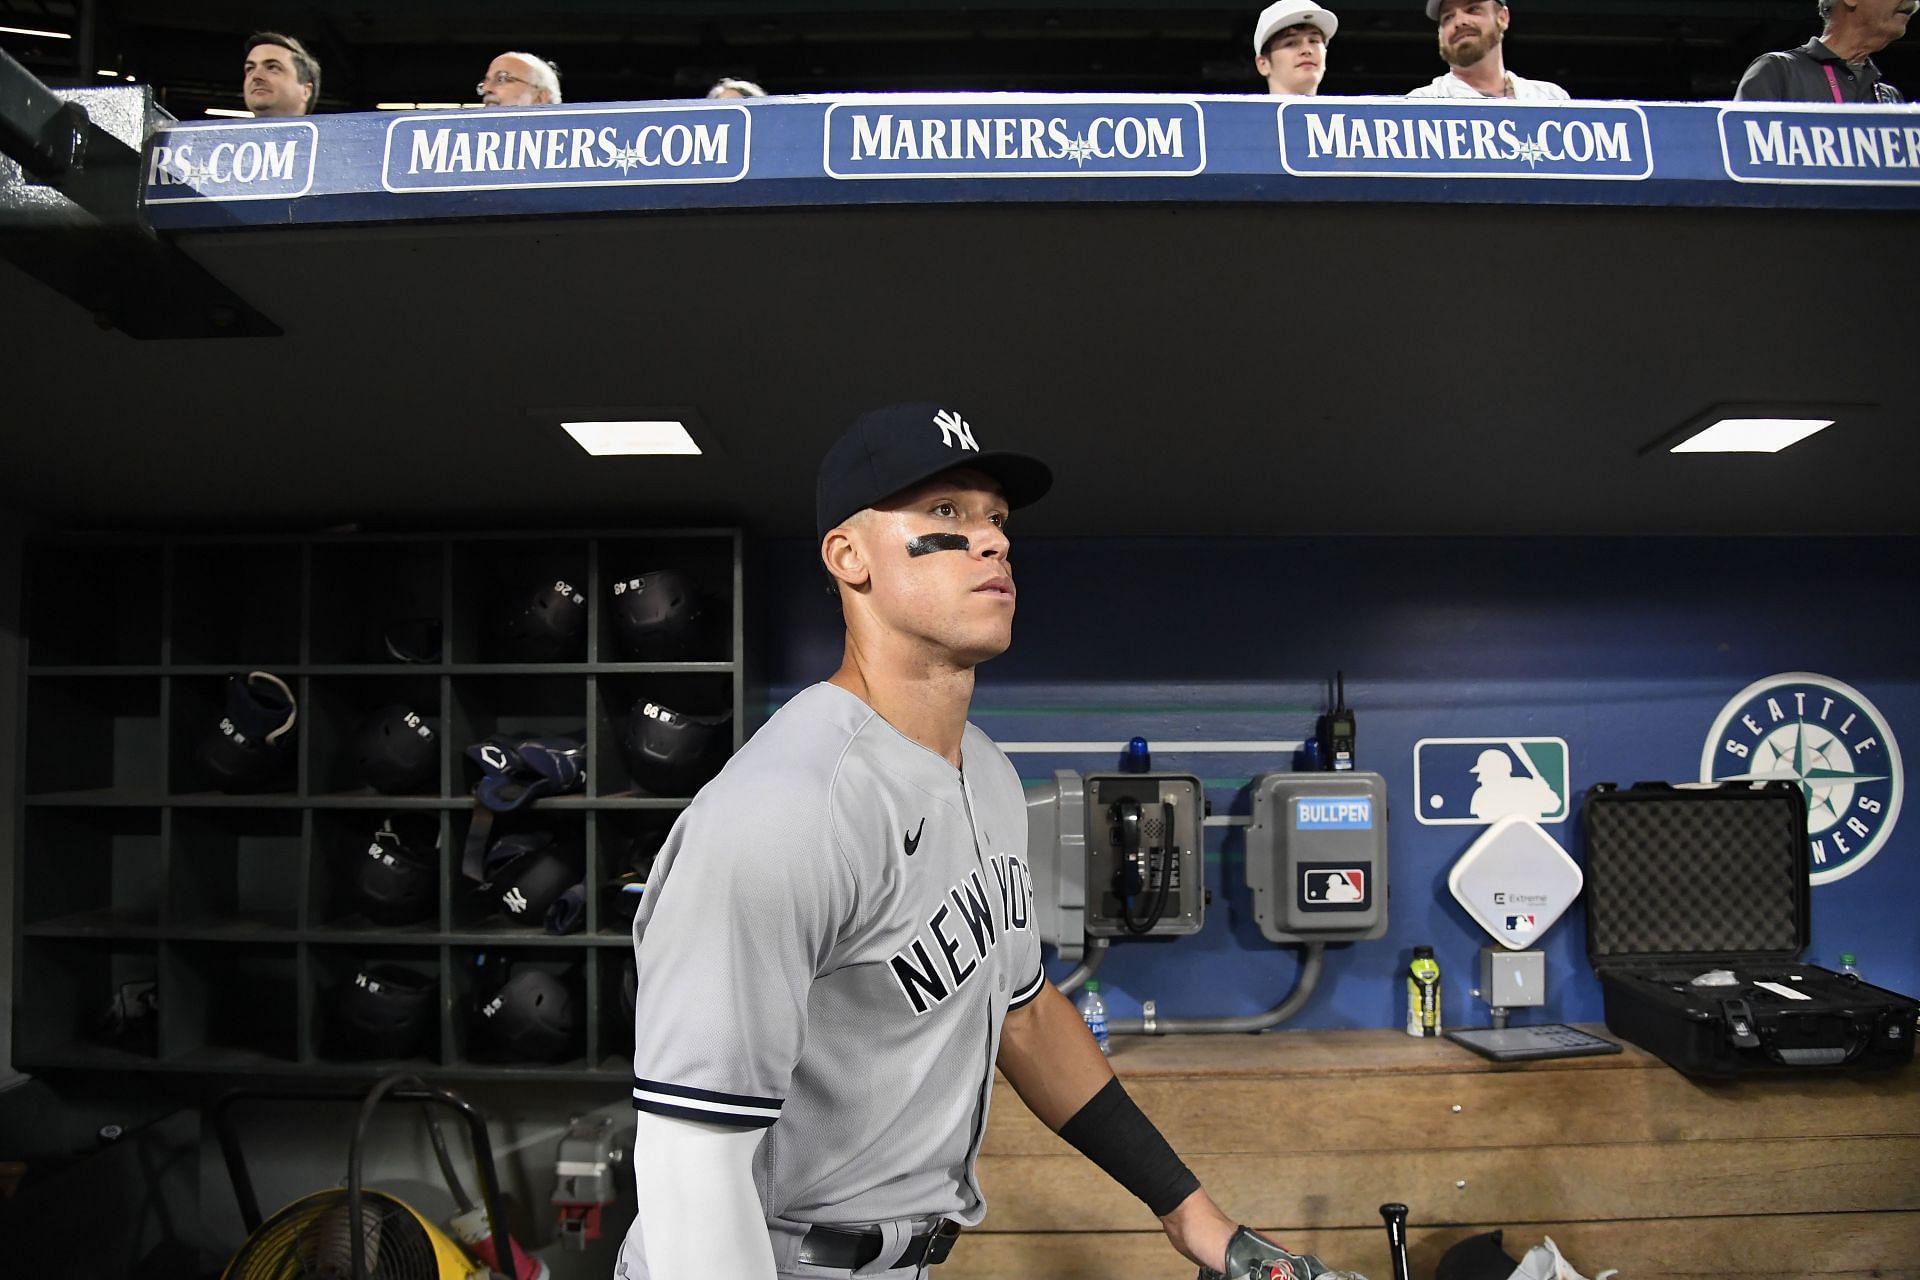 Aaron Judge now has 100 RBIs and 46 home runs on the season.